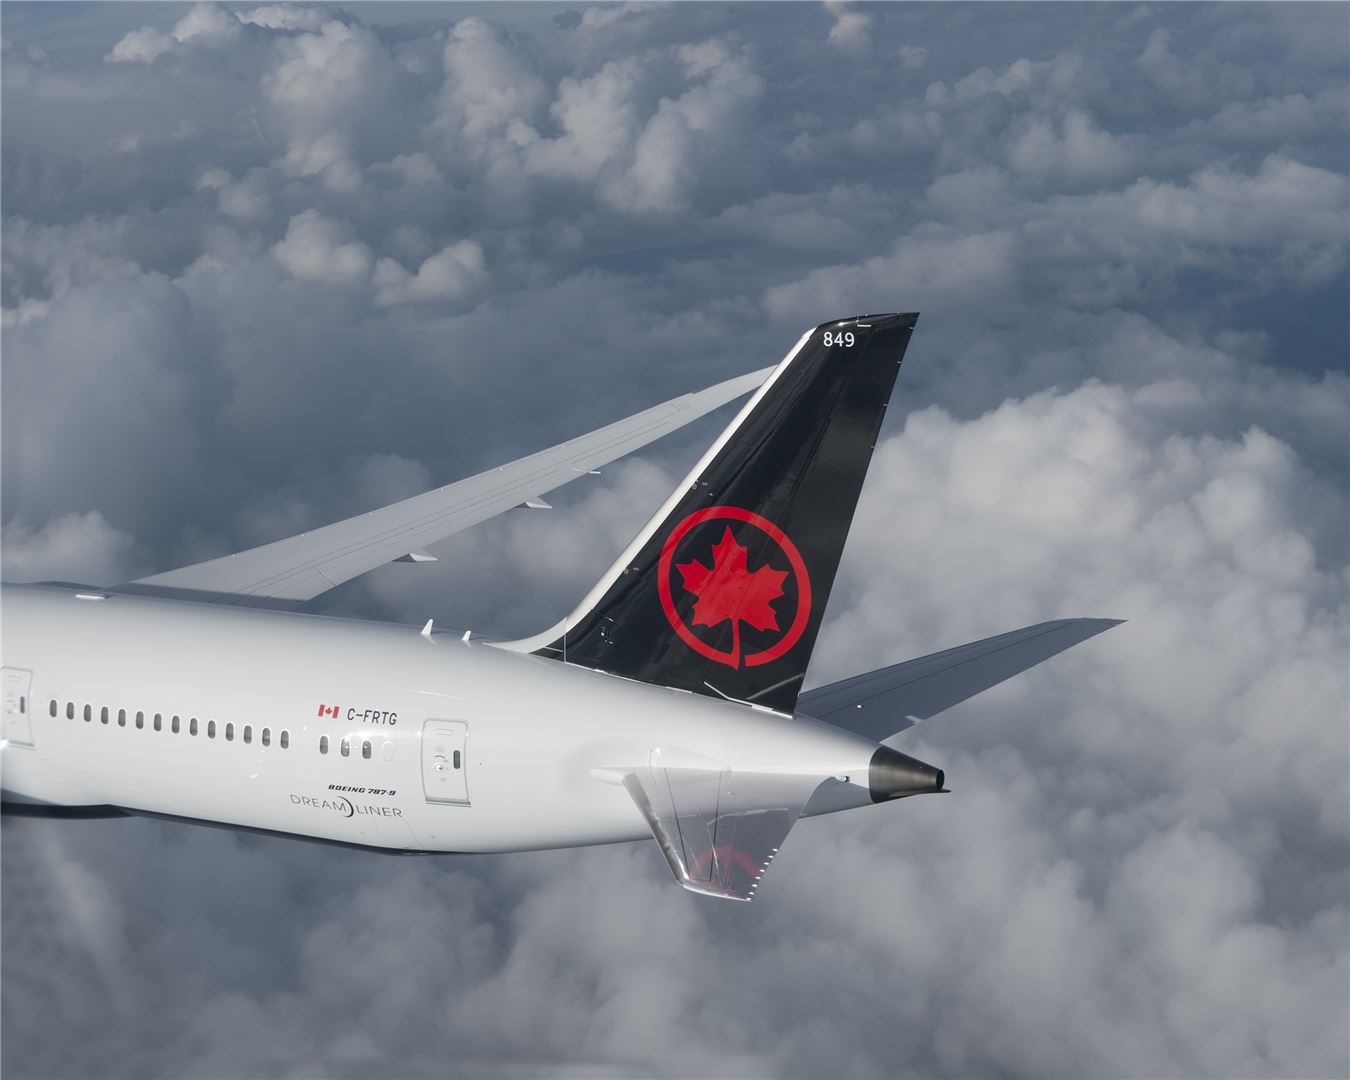 Following on Competitor’s Growth Plans, Air Canada Announces Expanded 2018 Schedule